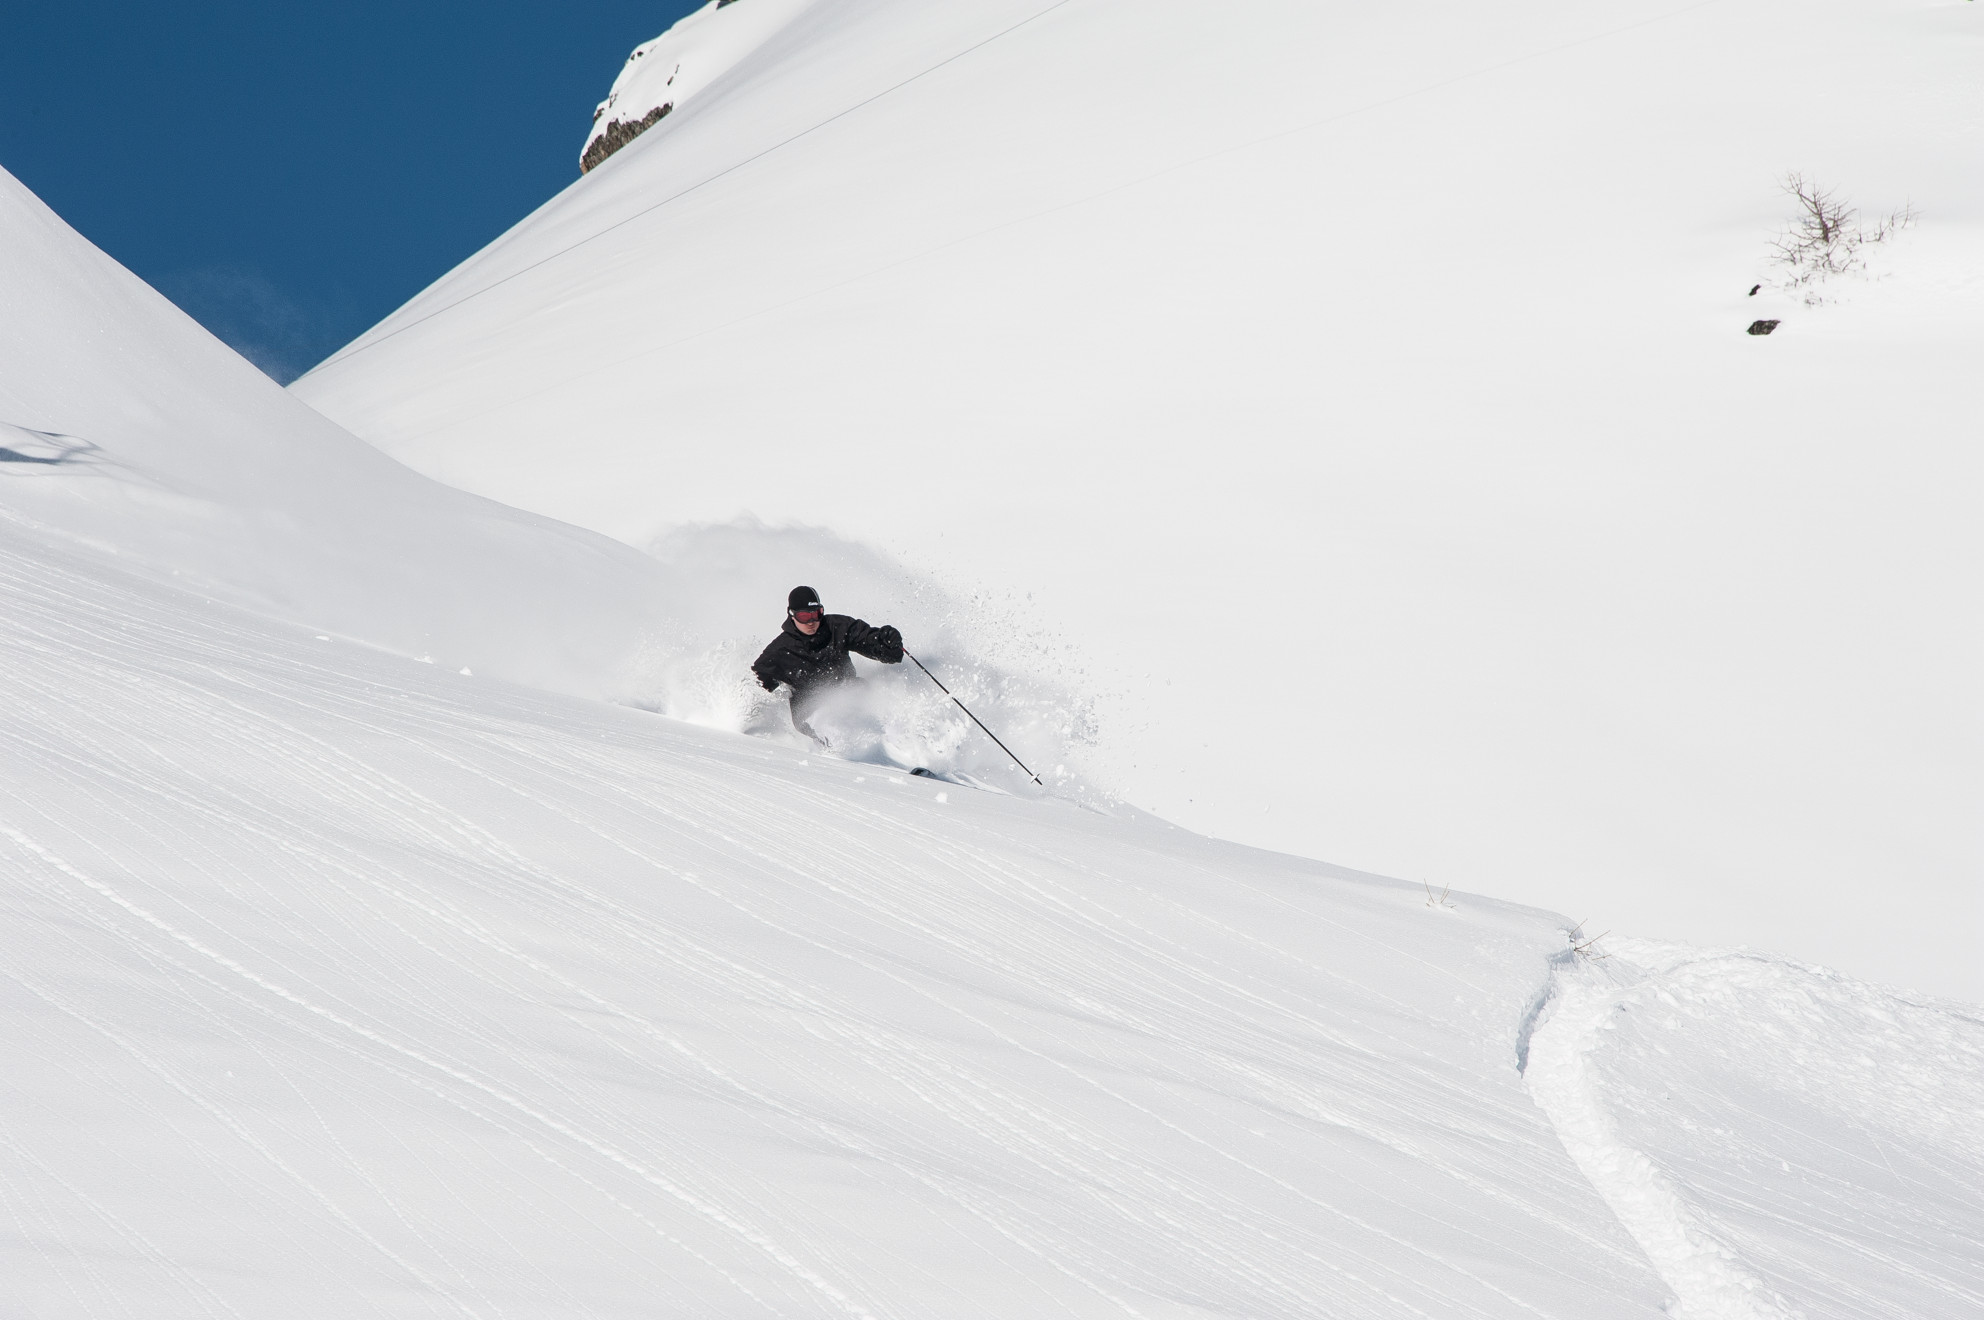 Playing in the powder in Serre chevalier